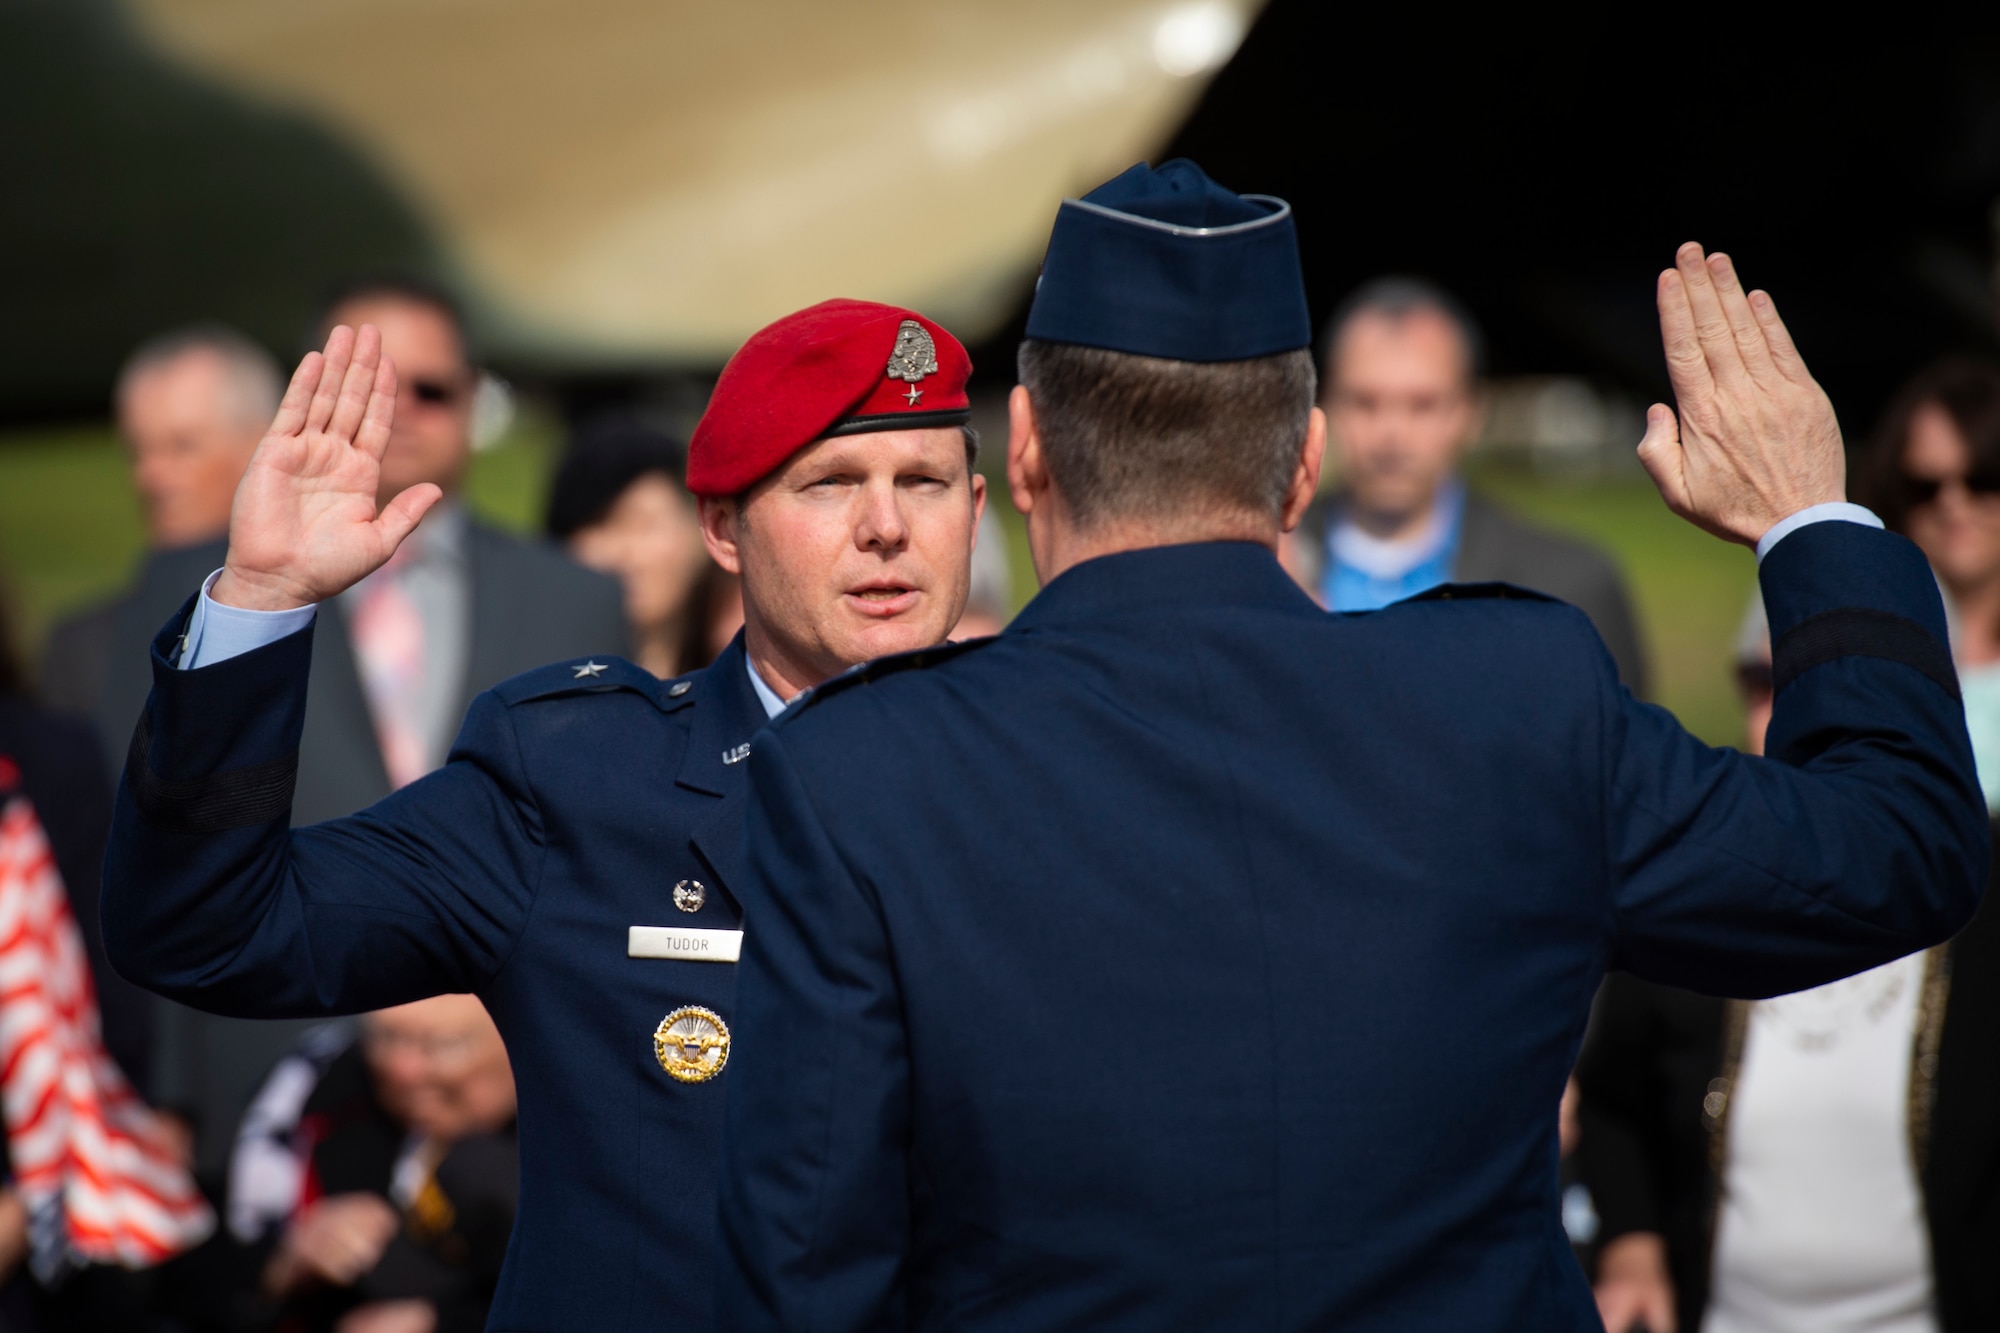 U.S. Air Force Lt. Gen. Brad Webb, right, commander of Air Force Special Operations Command, administers the officer’s oath to U.S. Air Force Brig. Gen. Claude K. Tudor, Jr., commander of the 24th Special Operations Wing, during a ceremony at Hurlburt Field, Florida, Feb. 8, 2019.